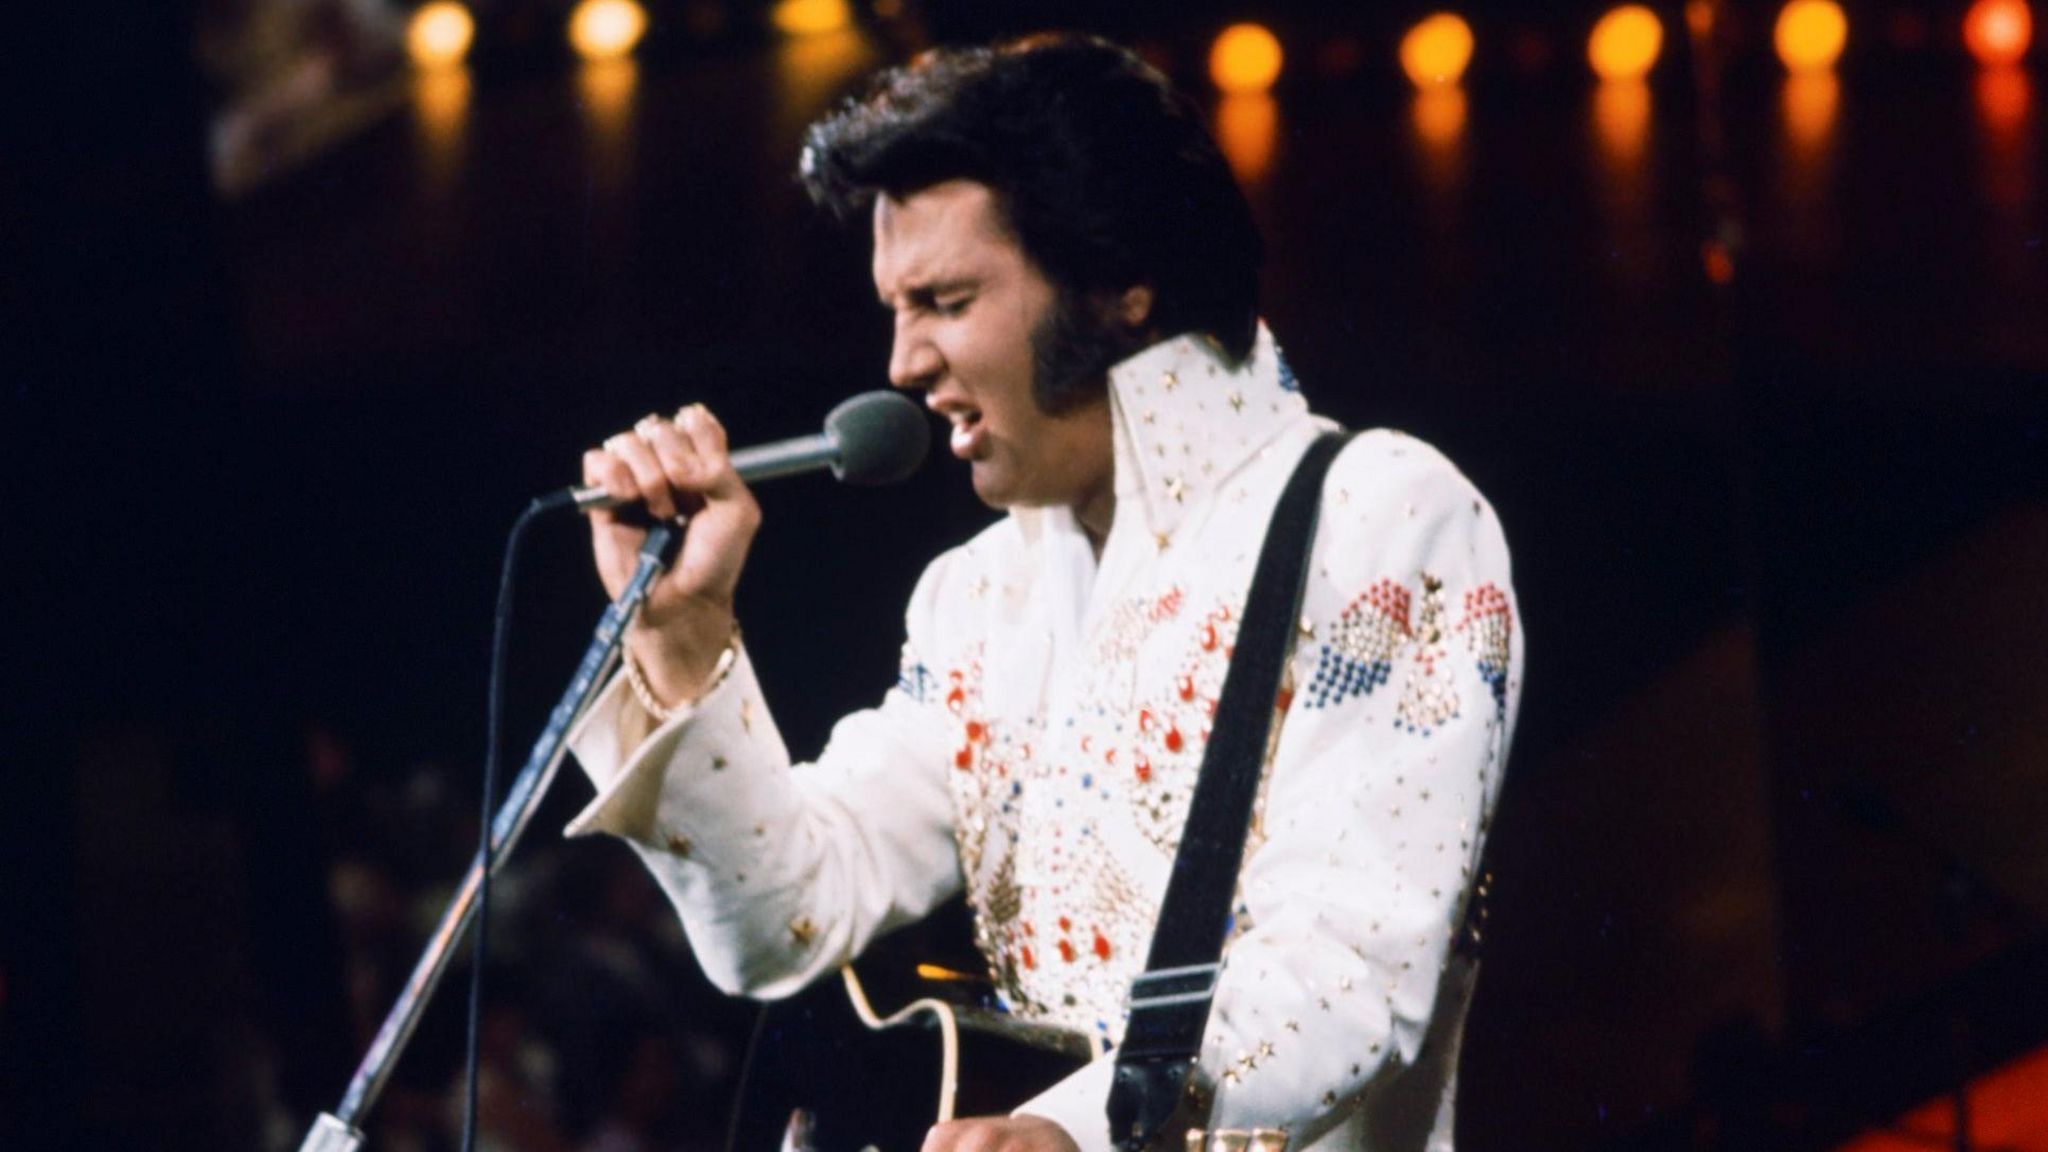 Elvis Presley sings on stage. He is wearing a white sparkly suit and is playing a black acoustic guitar